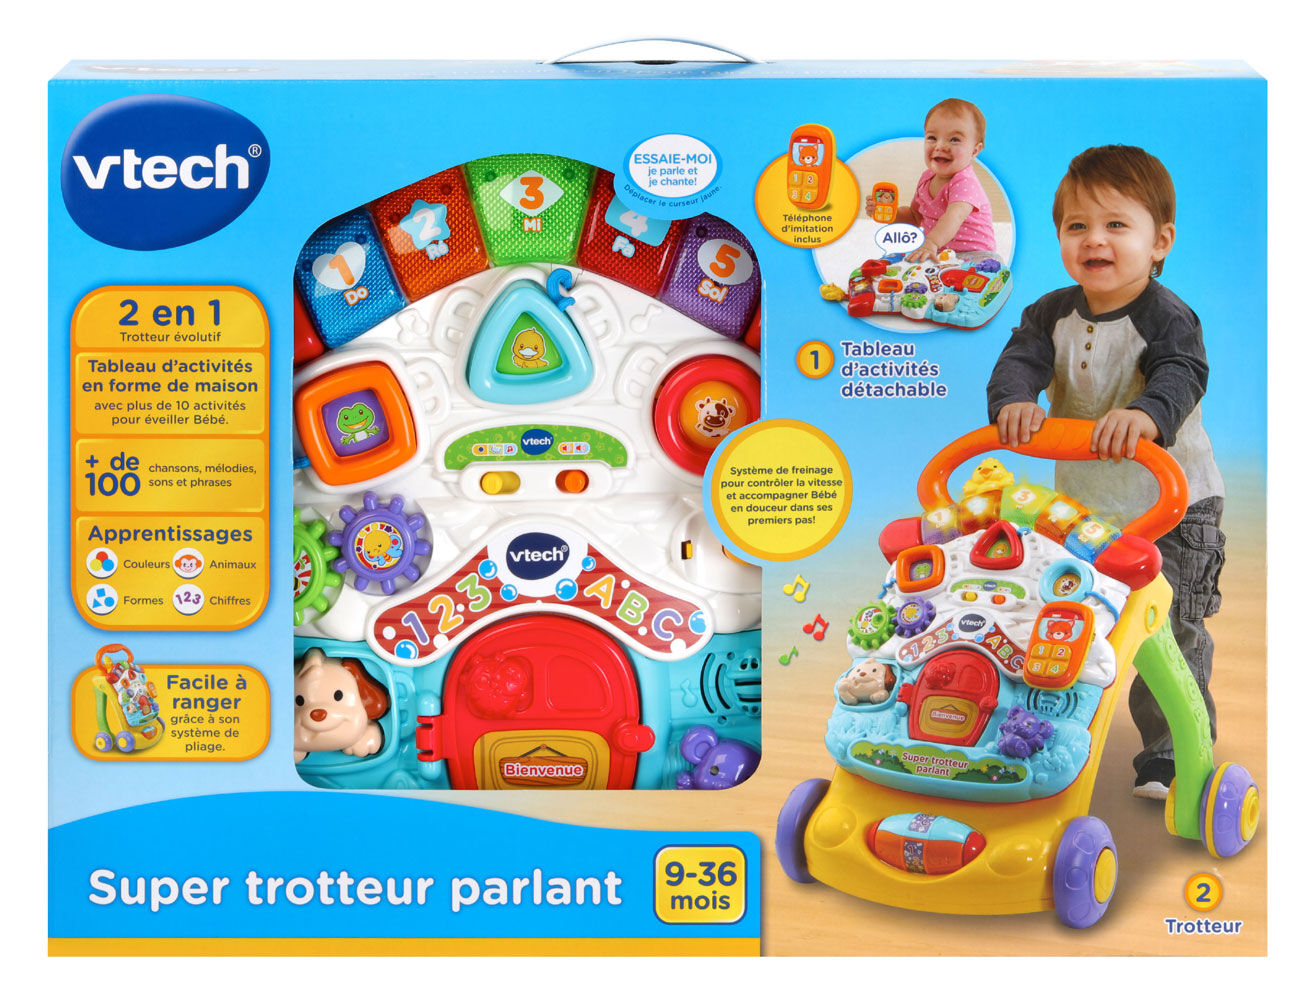 vtech stroll and discover activity walker pink